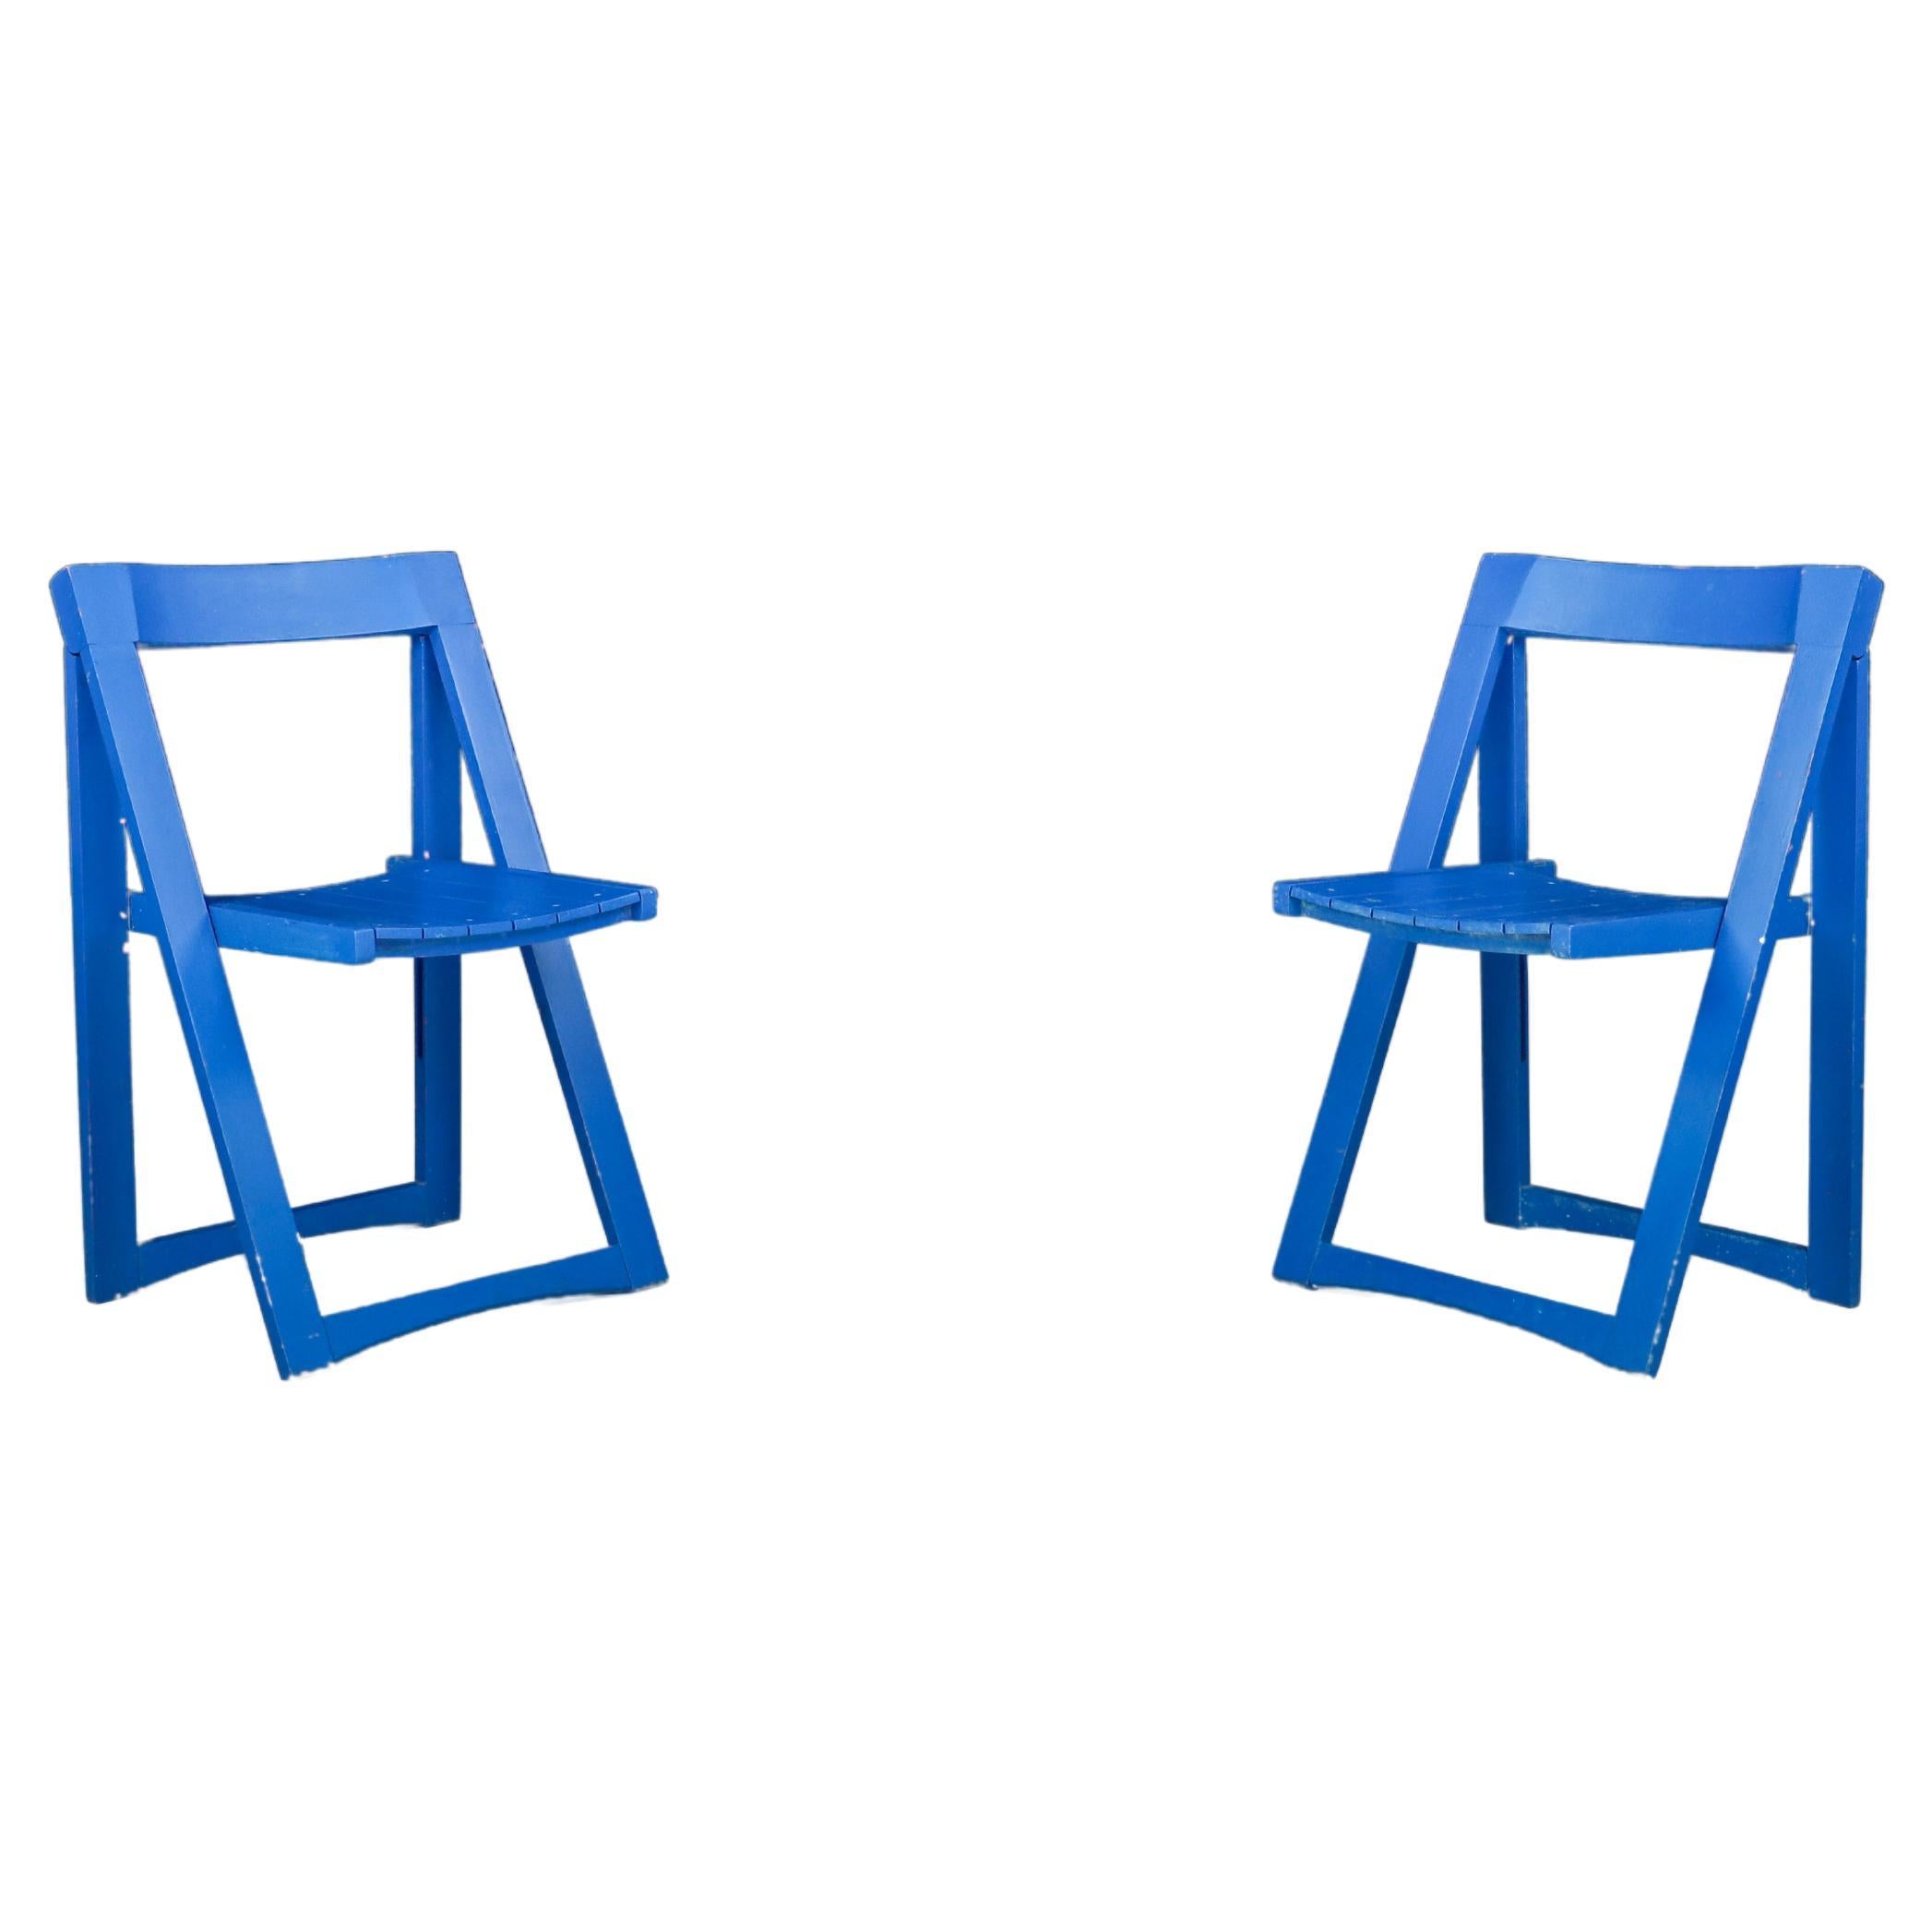 Aldo Jacober for Alberto Bazzani Blue Painted Folding Chairs Italy 1960 Set 2